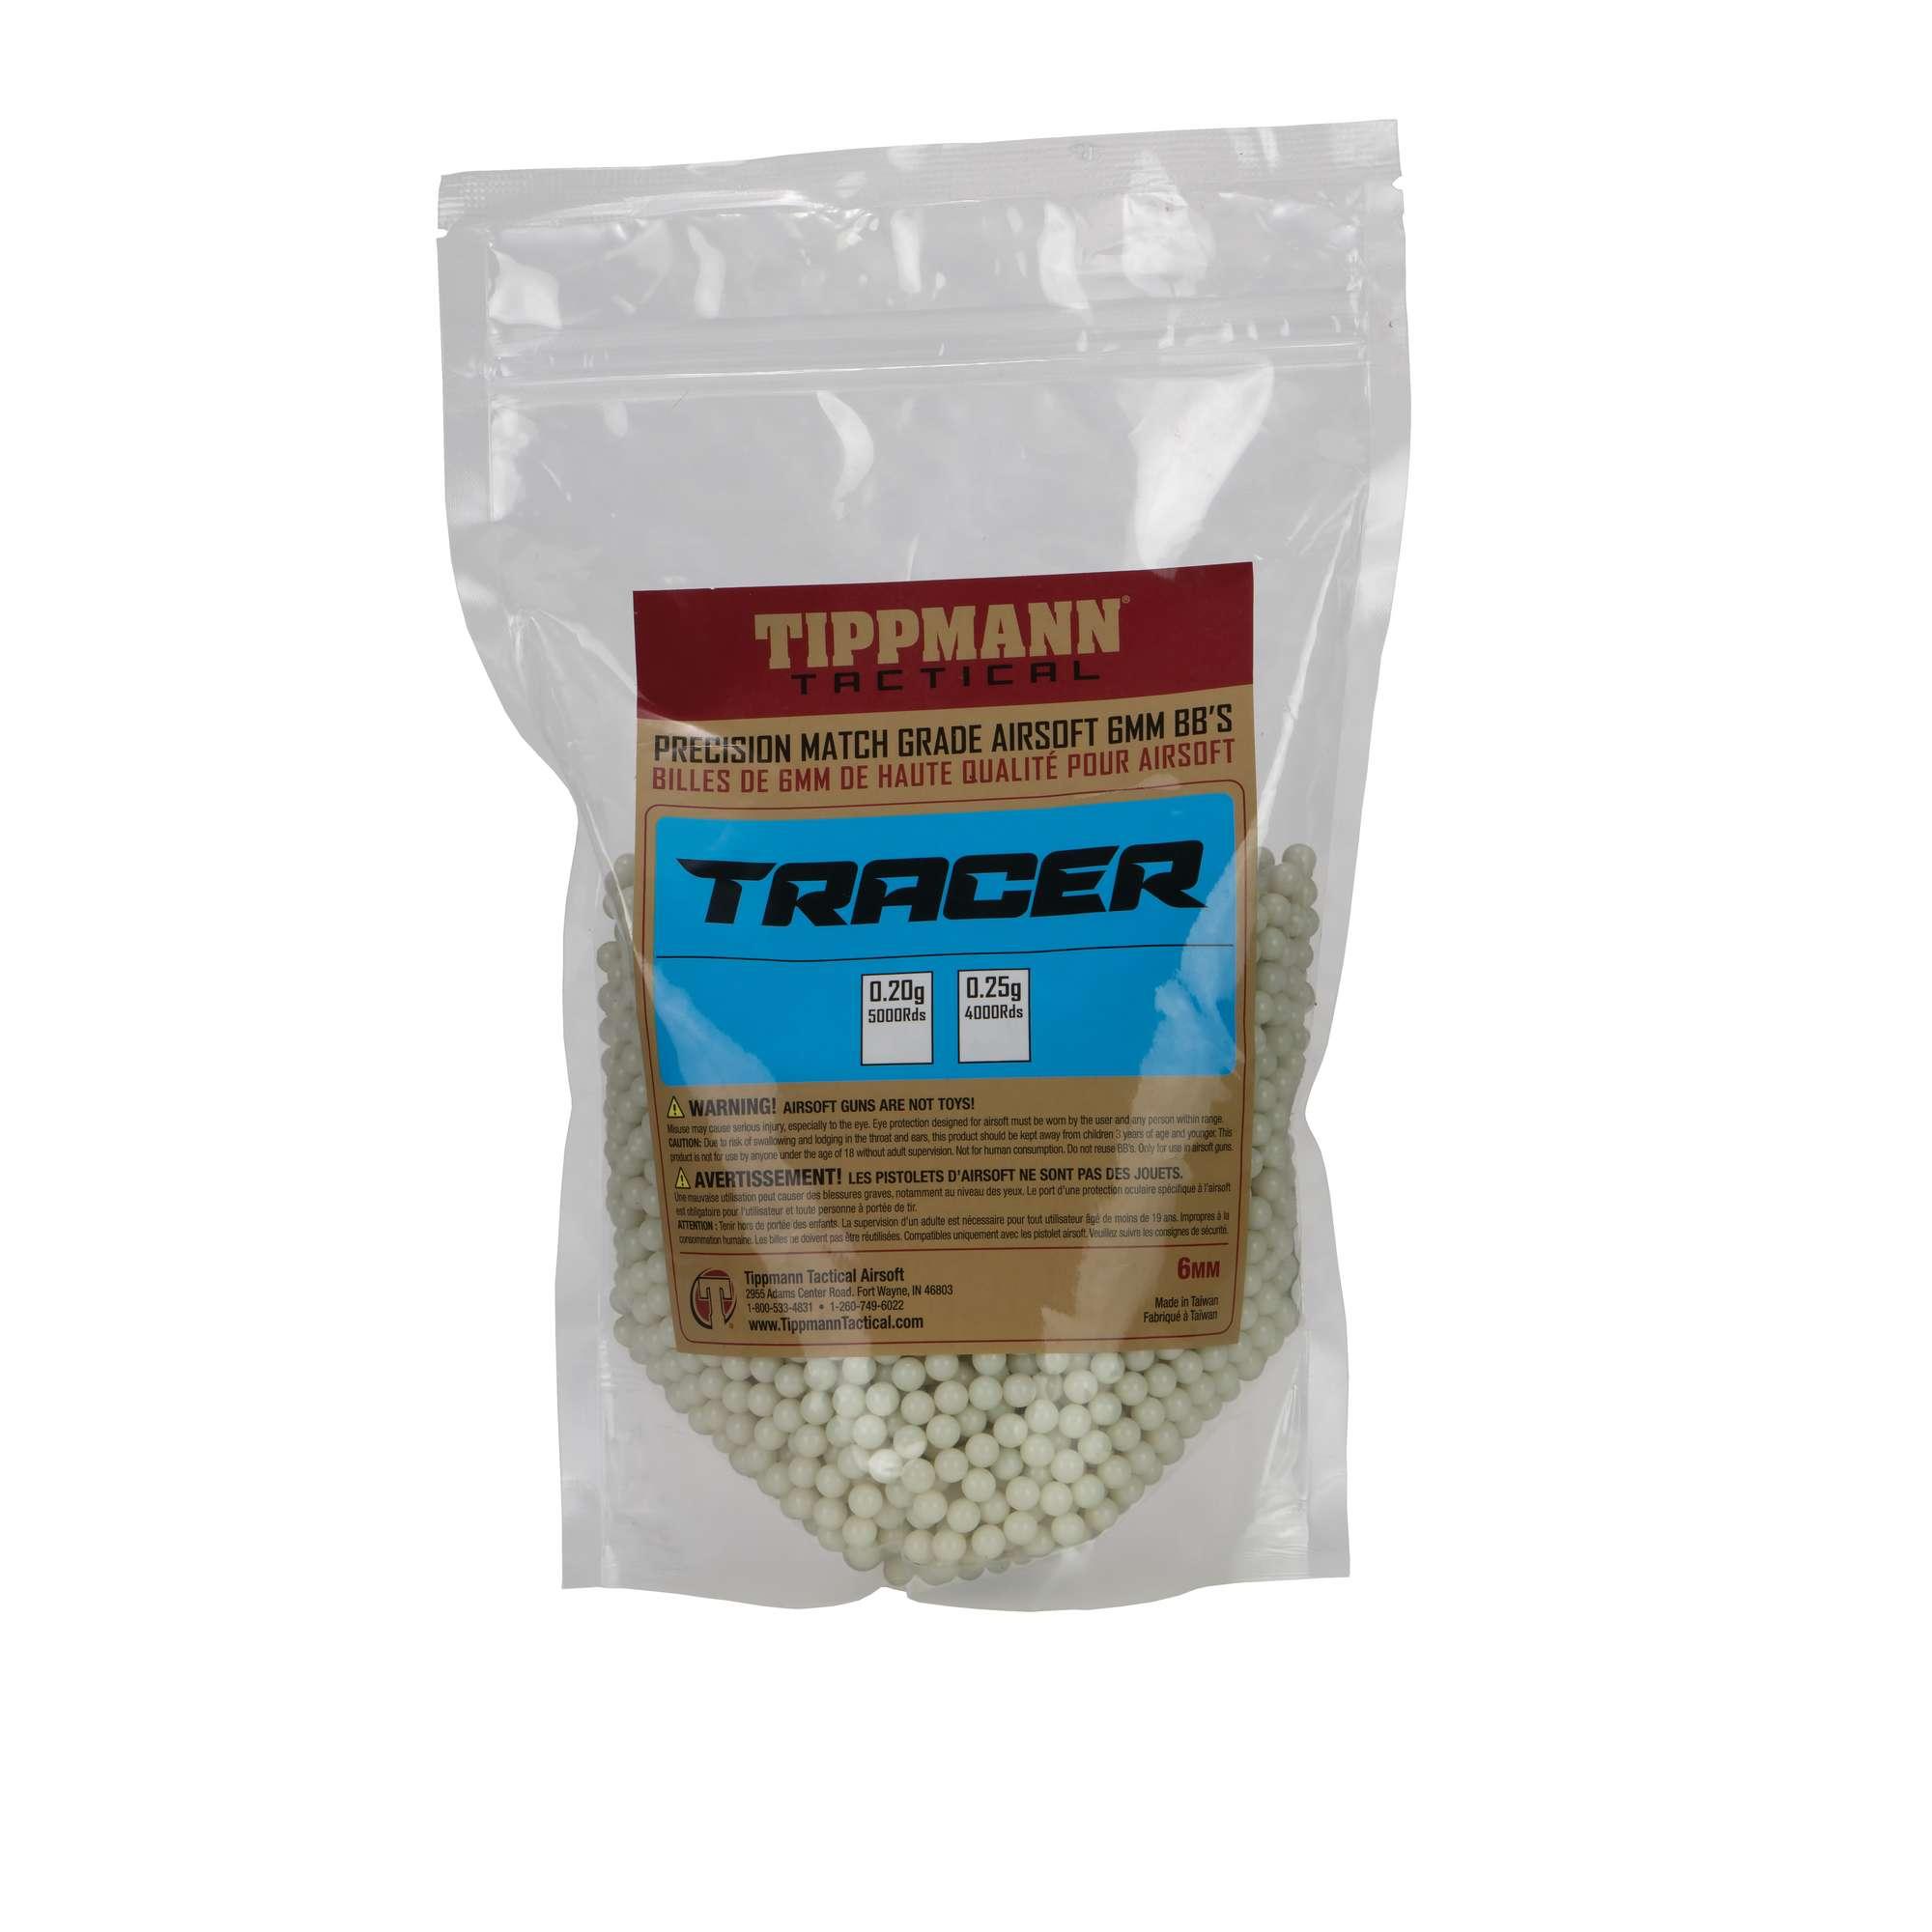 Tippmann Tactical Tracer Airsoft Ammo 25g 4K Glow